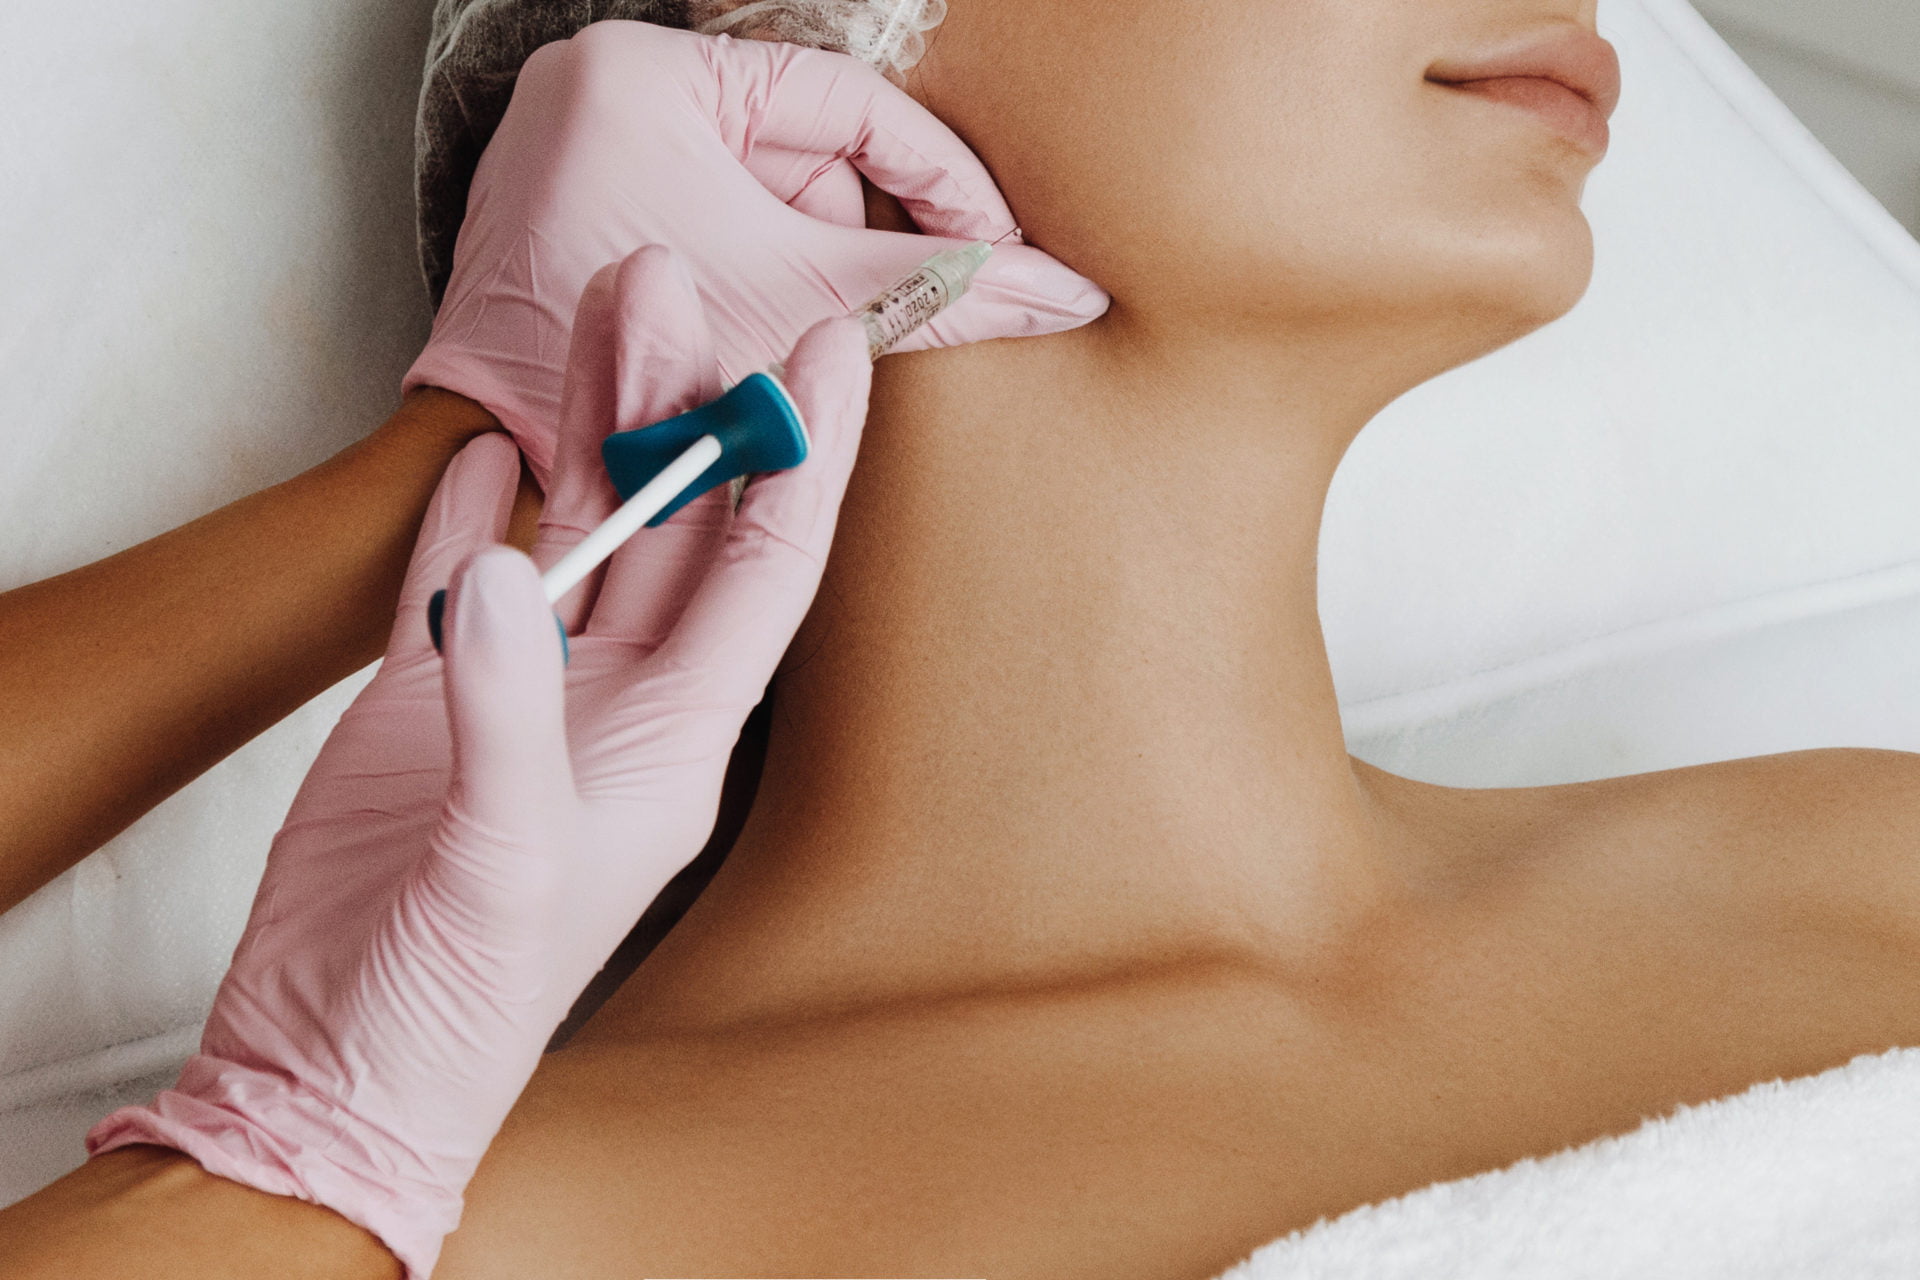 Dermal fillers Instantly Restore Volume and Fullness to the Skin to Correct Facial Wrinkles.